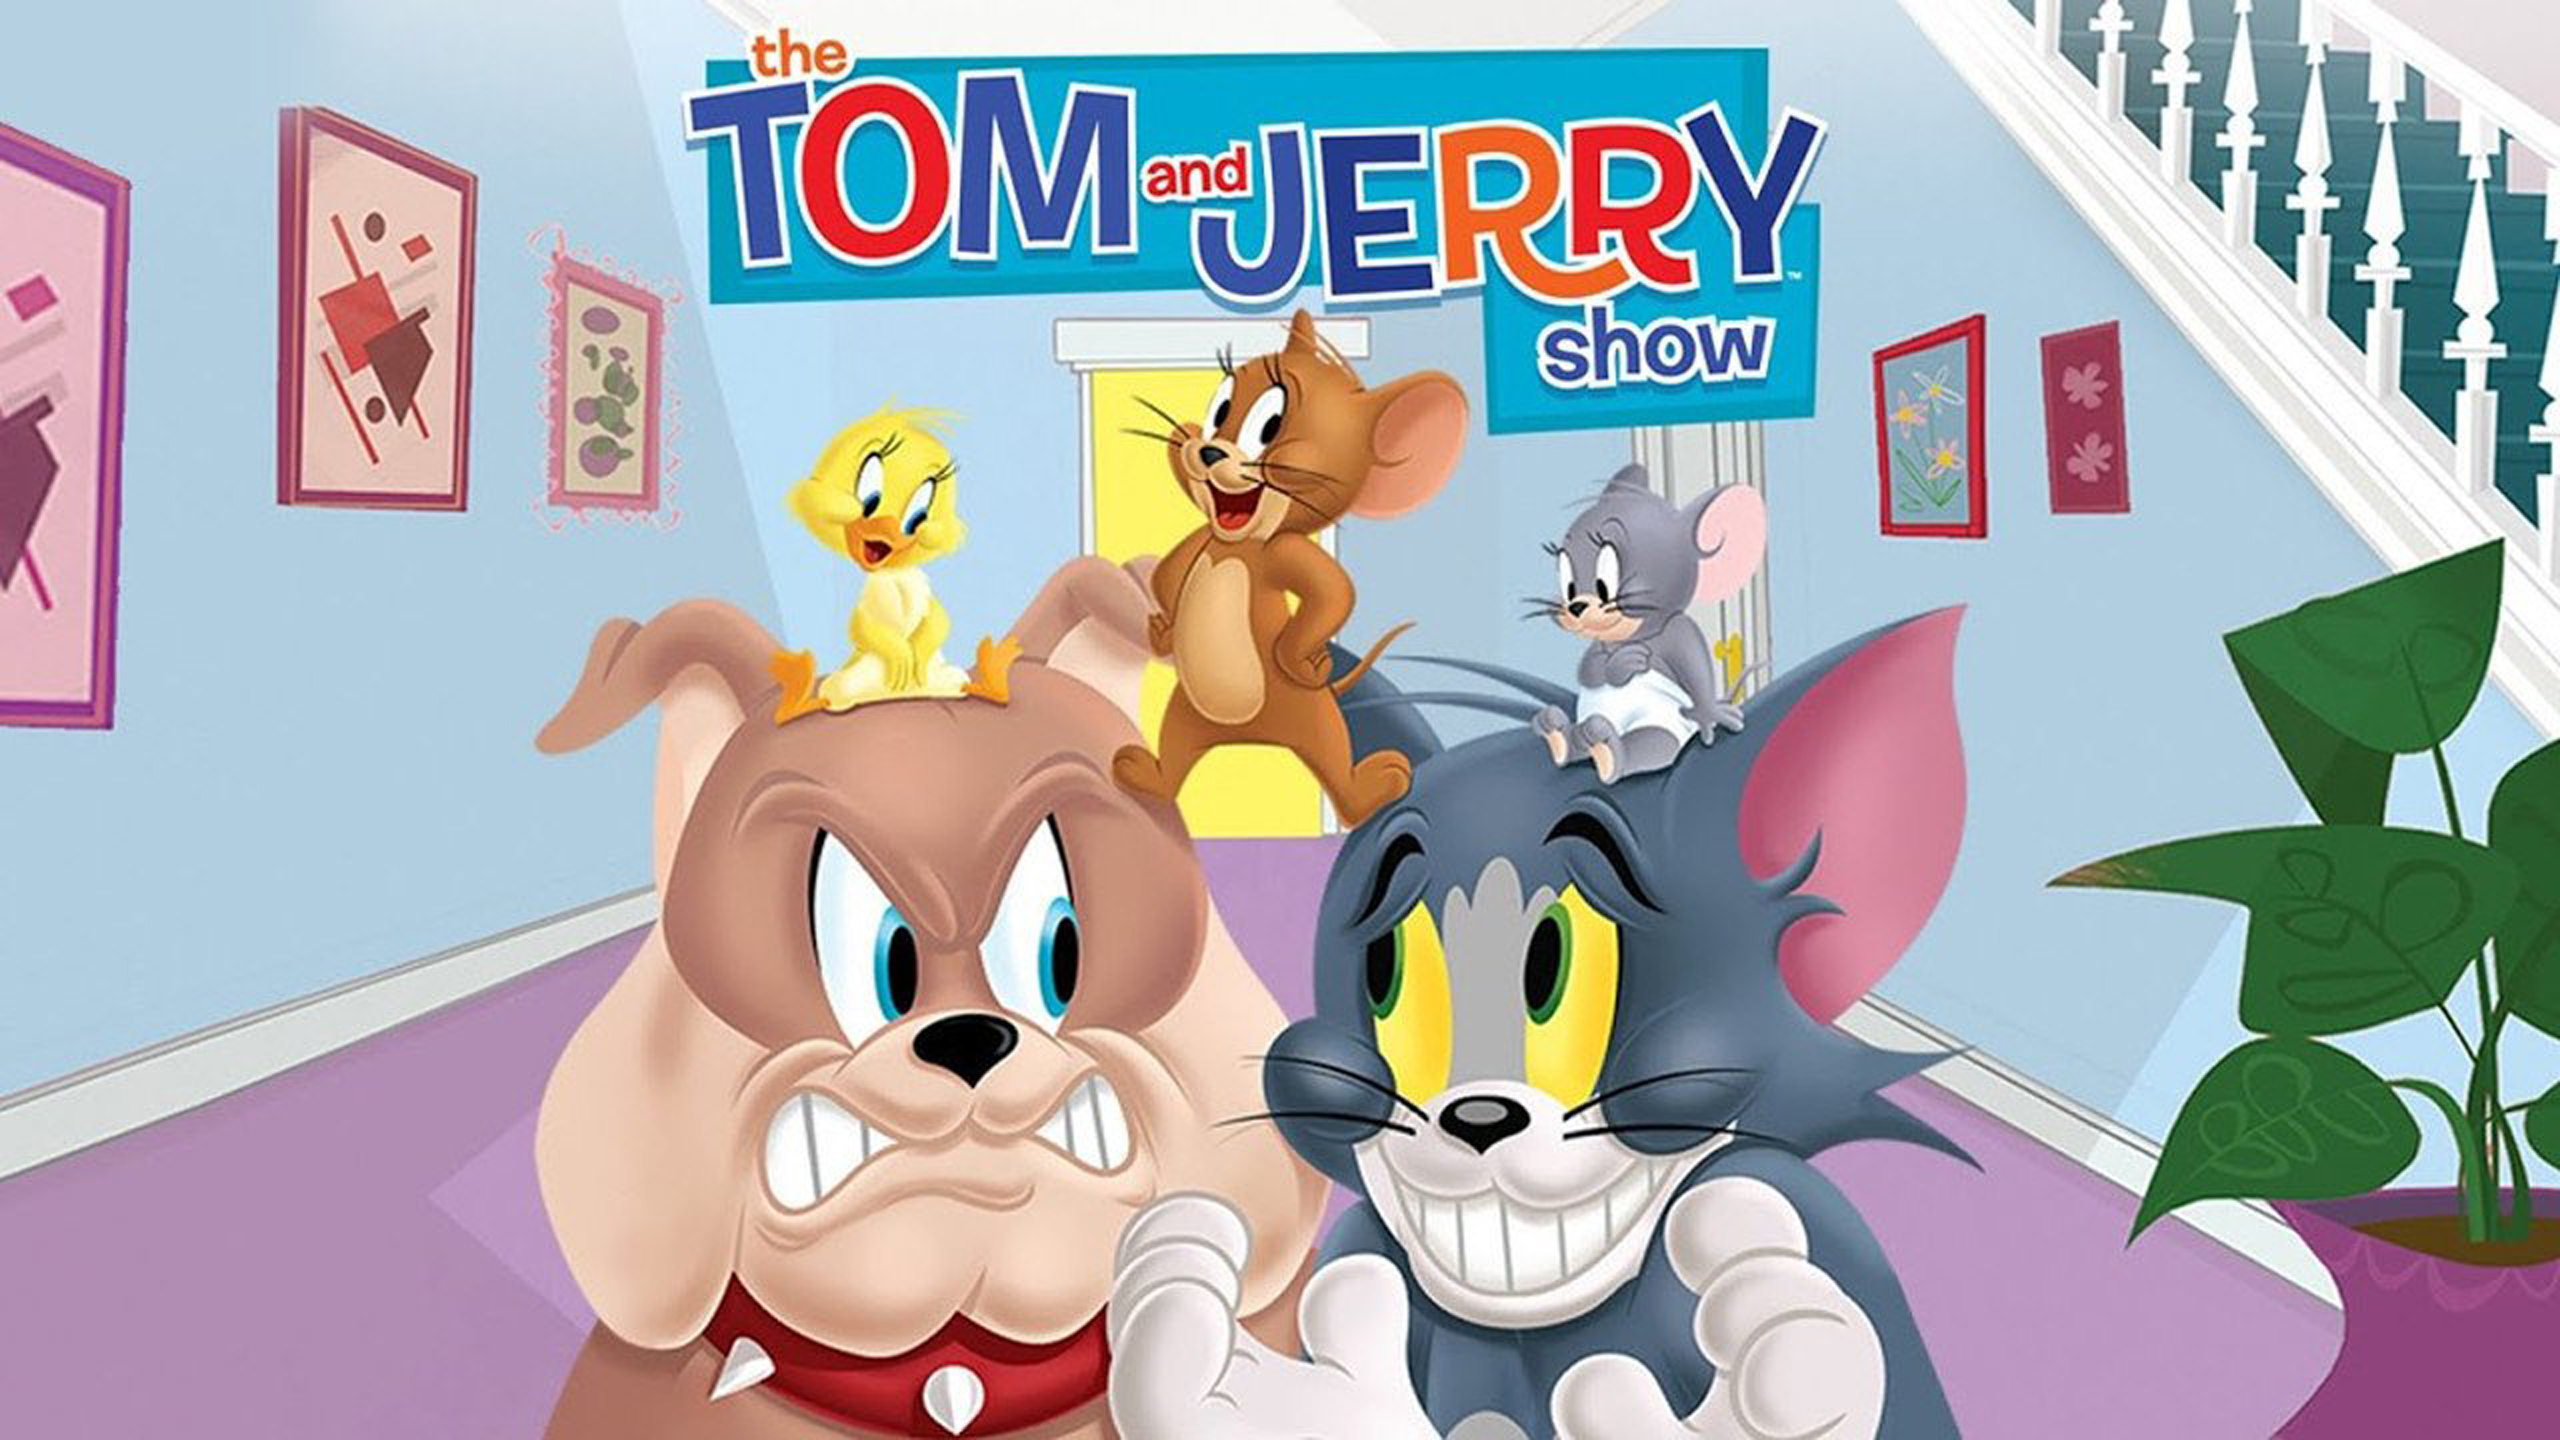 26+] The Tom And Jerry Show Wallpapers - WallpaperSafari